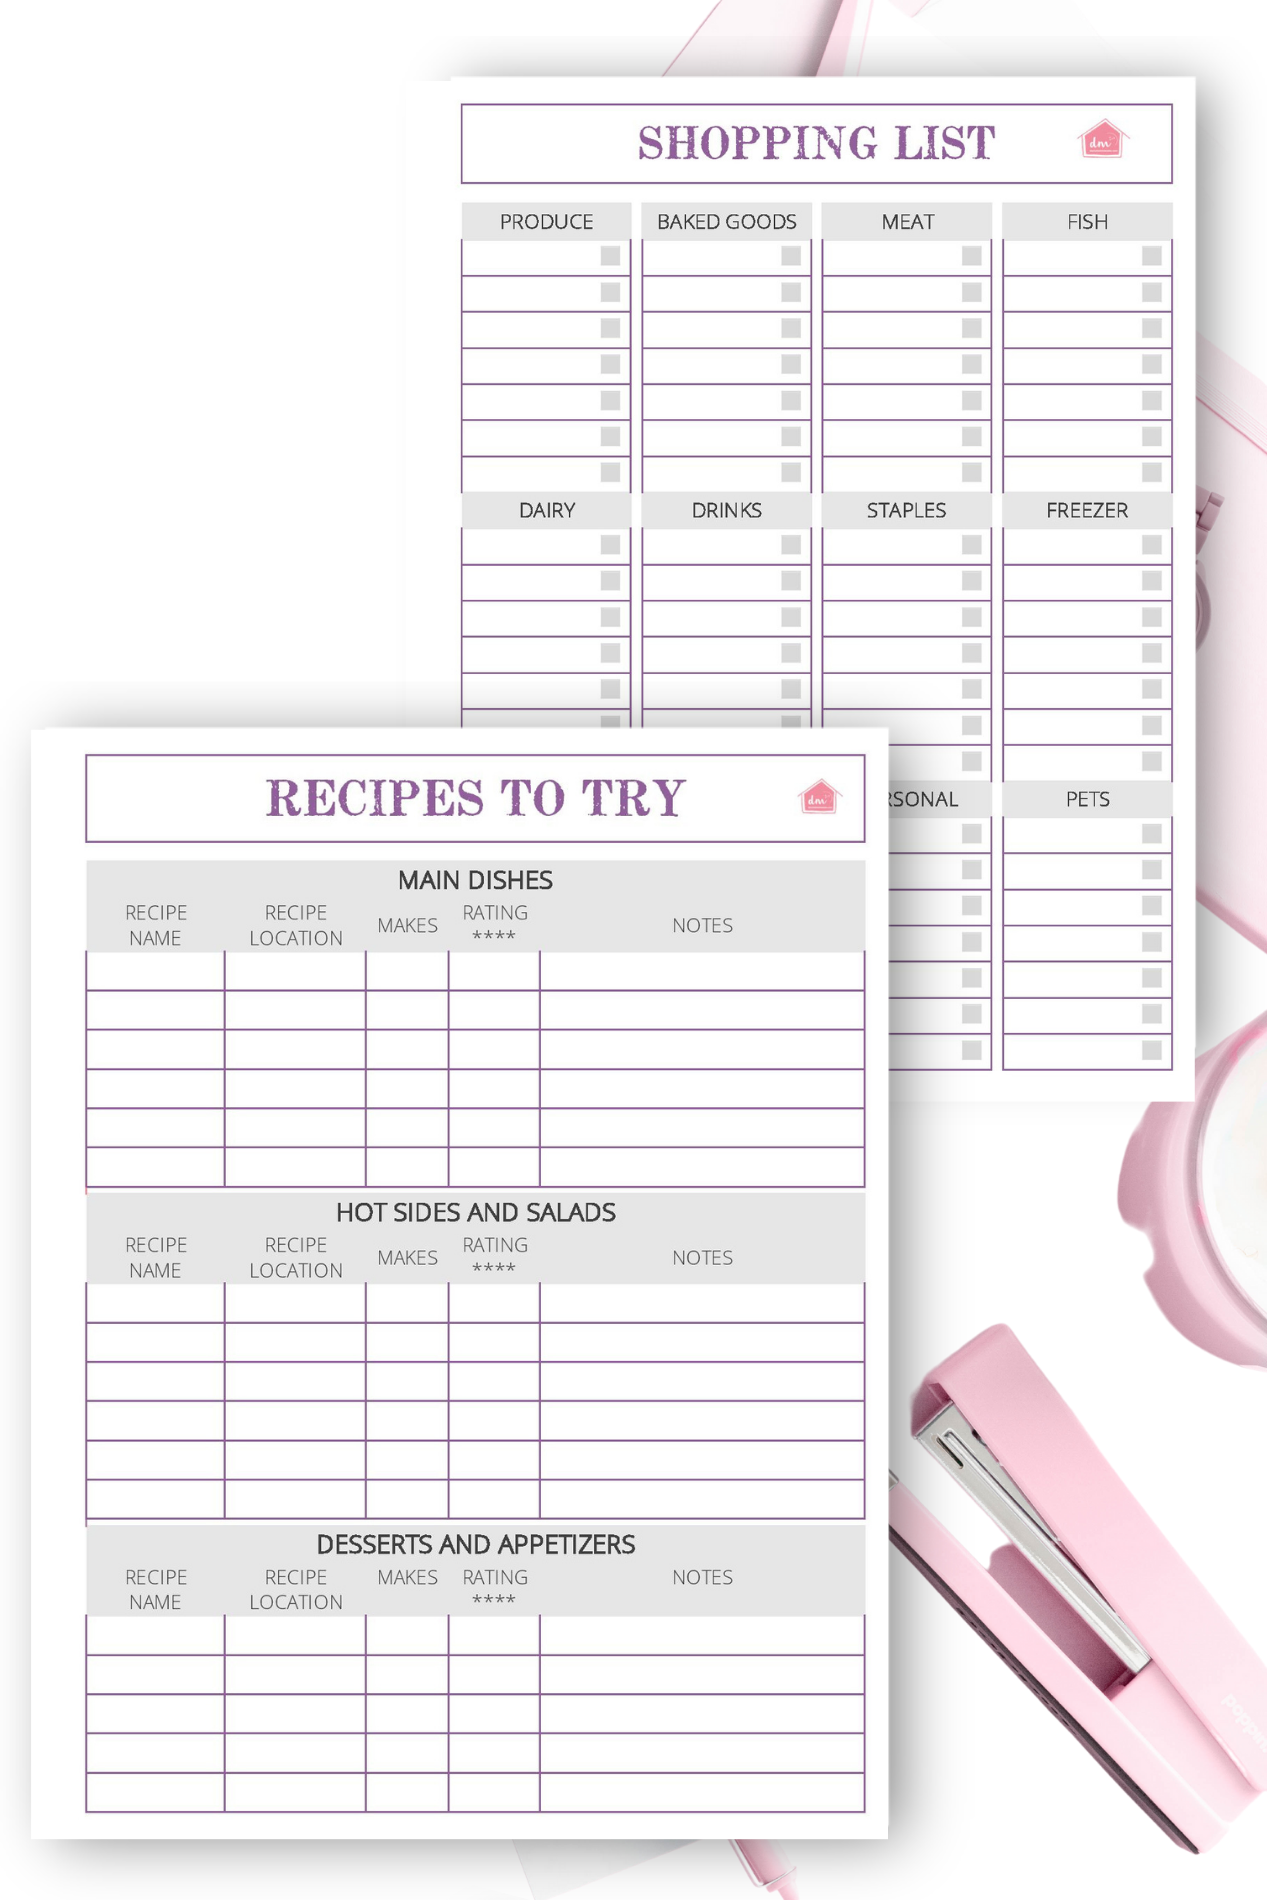 DINNER-DONE! Meal Planning System